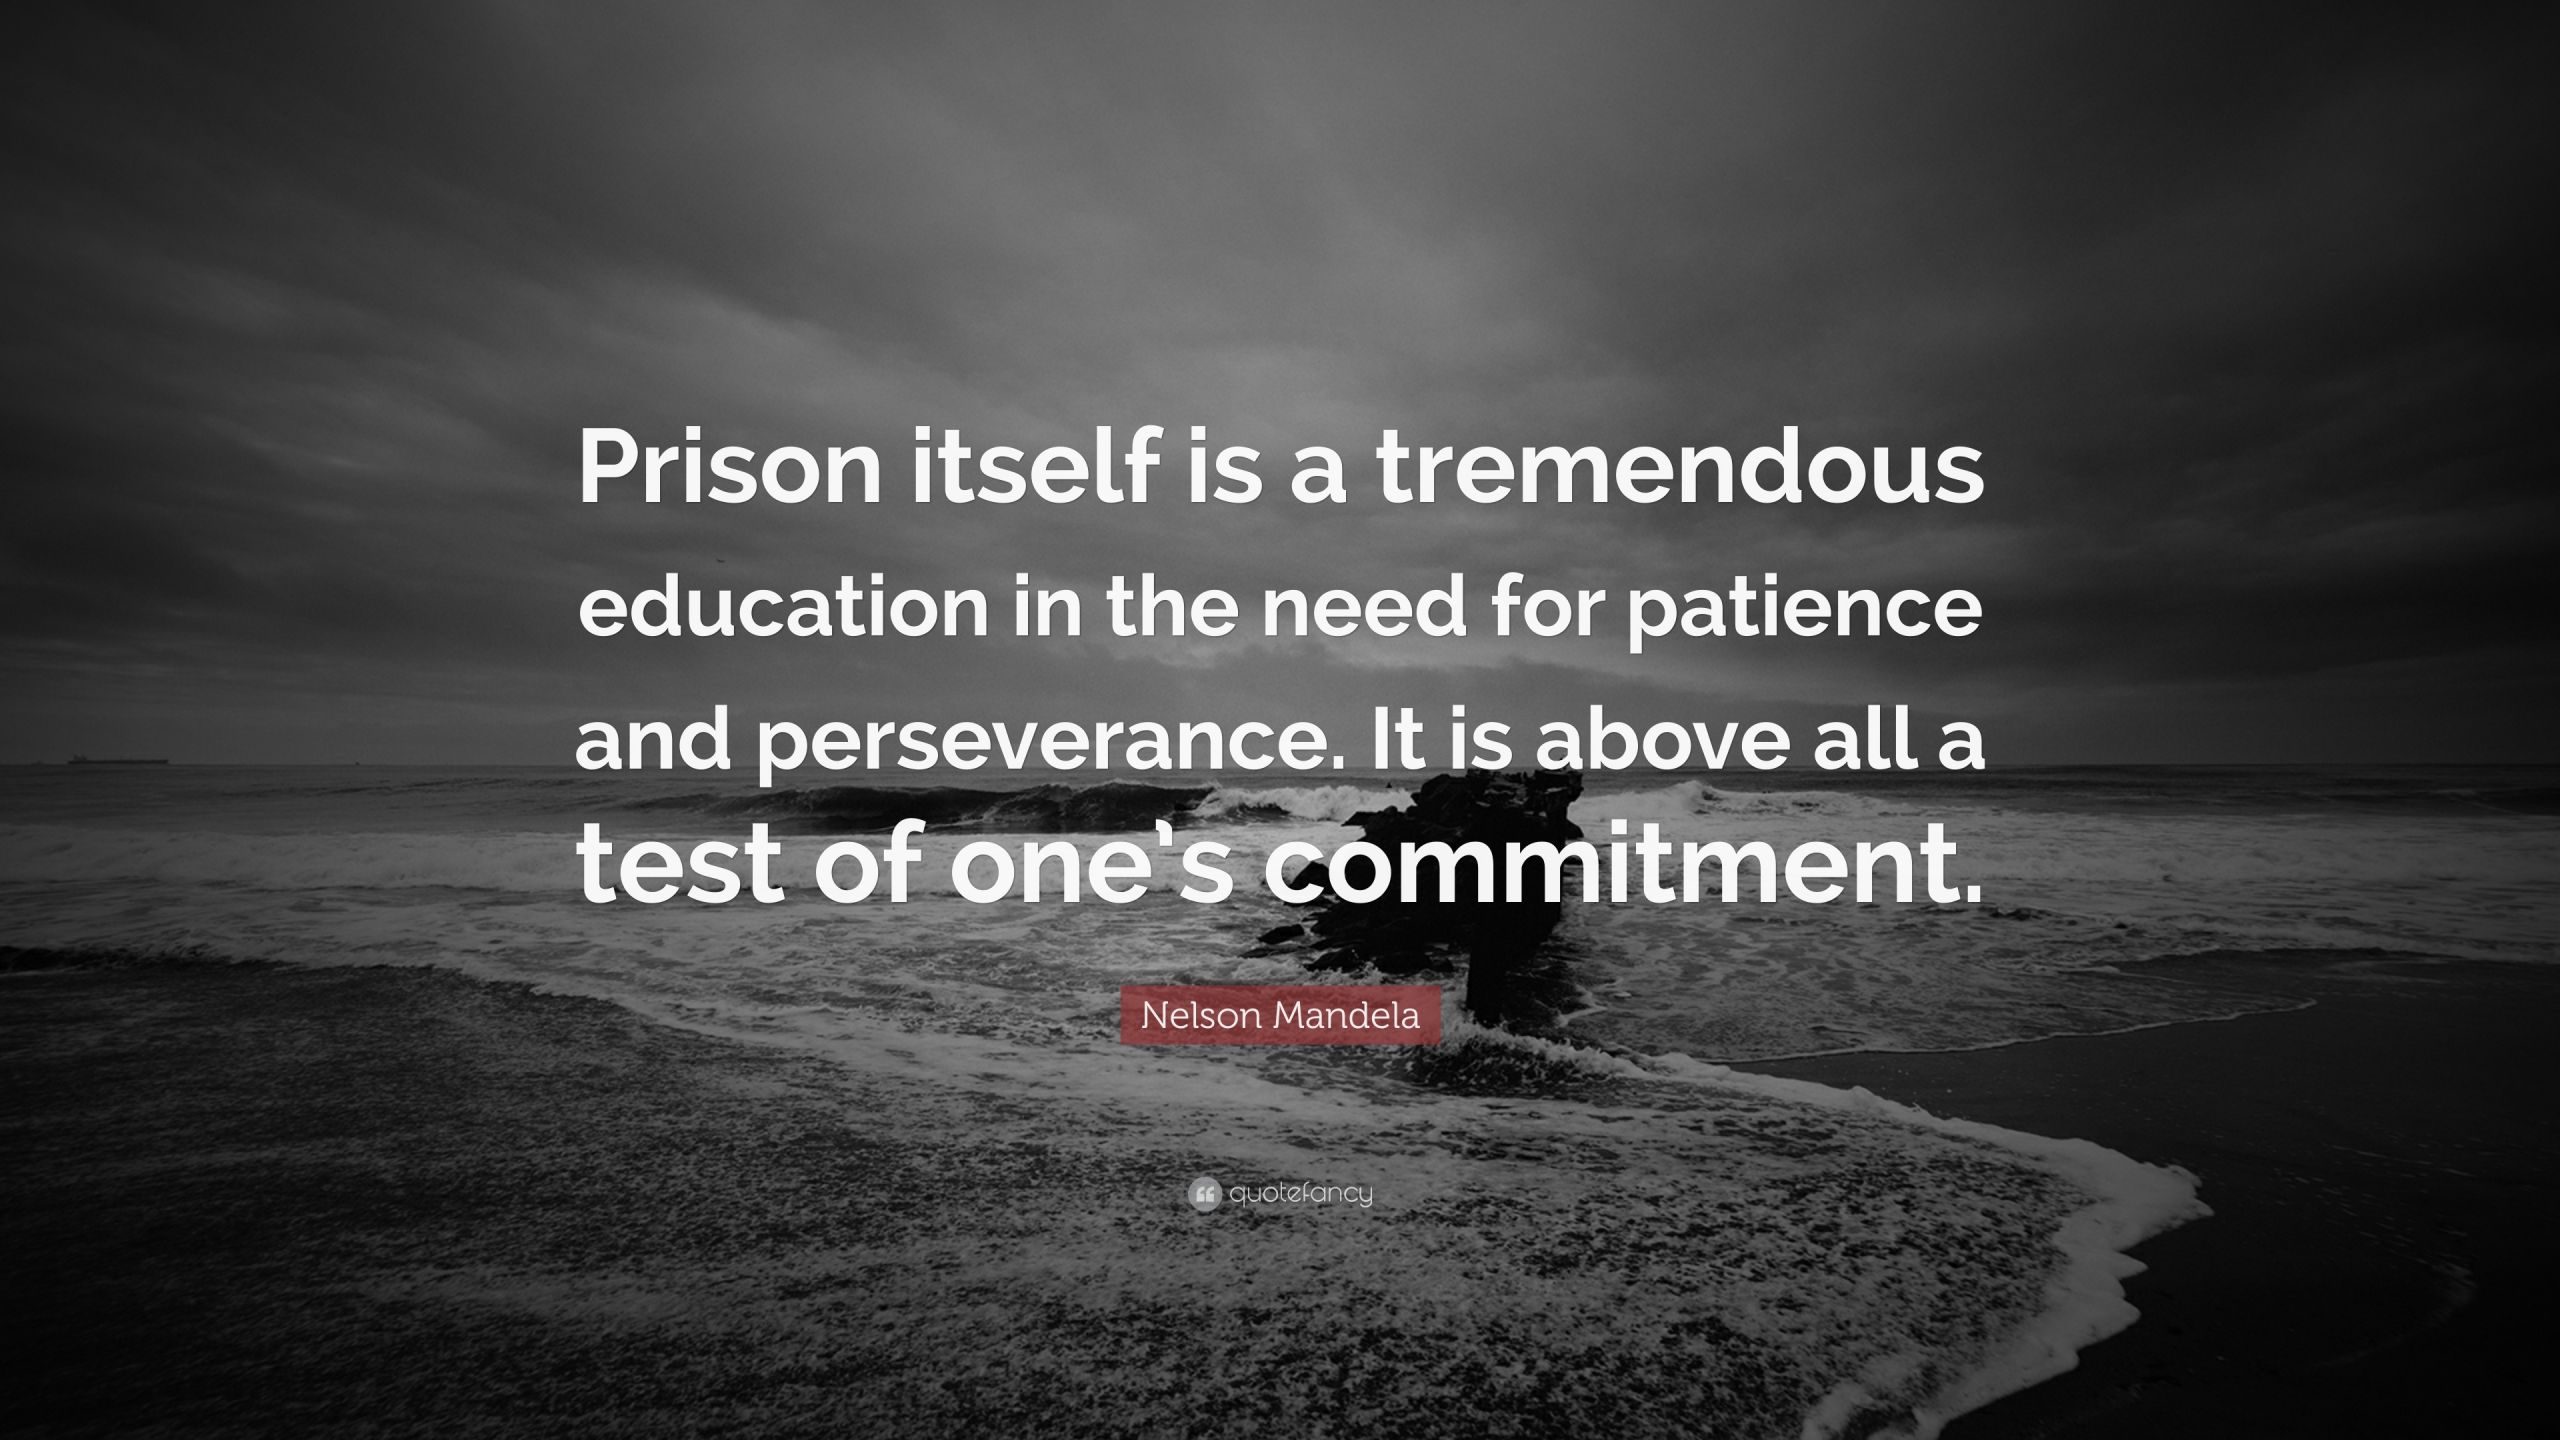 Inspirational Quotes For Prisoners
 Nelson Mandela Quote “Prison itself is a tremendous